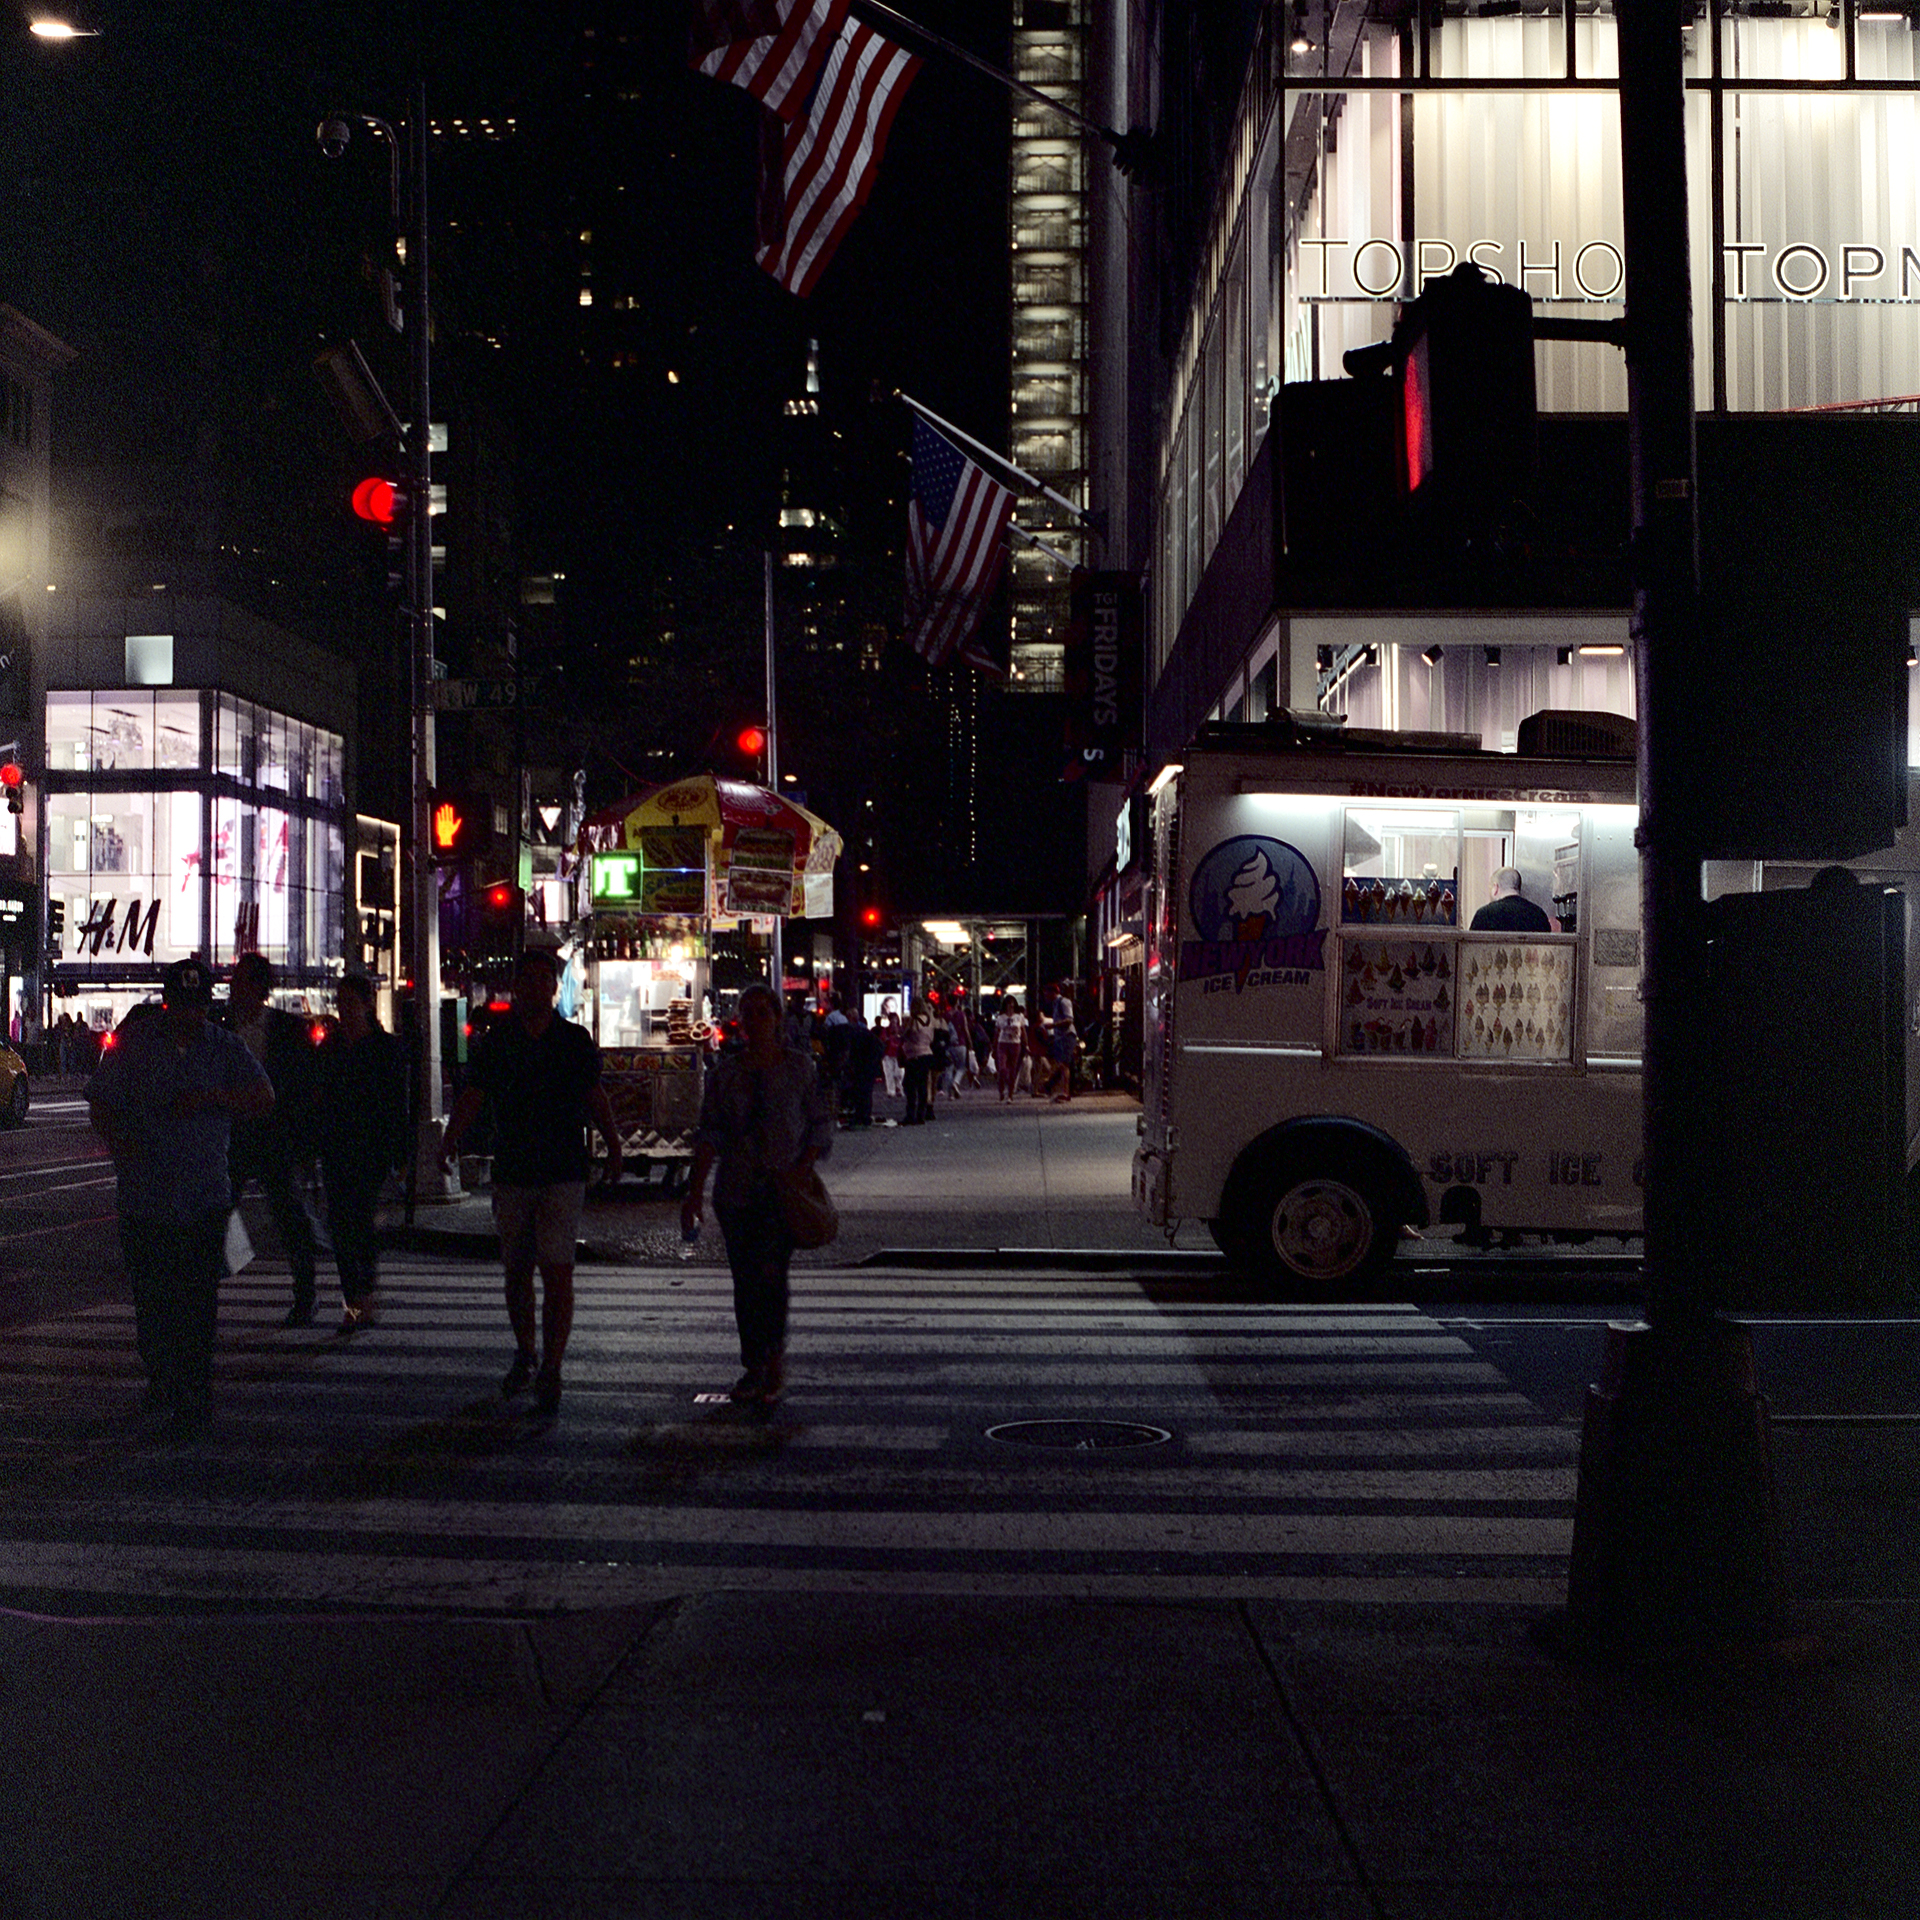 People crossing at night at the intersection of 49th and 5th Ave in Manhattan